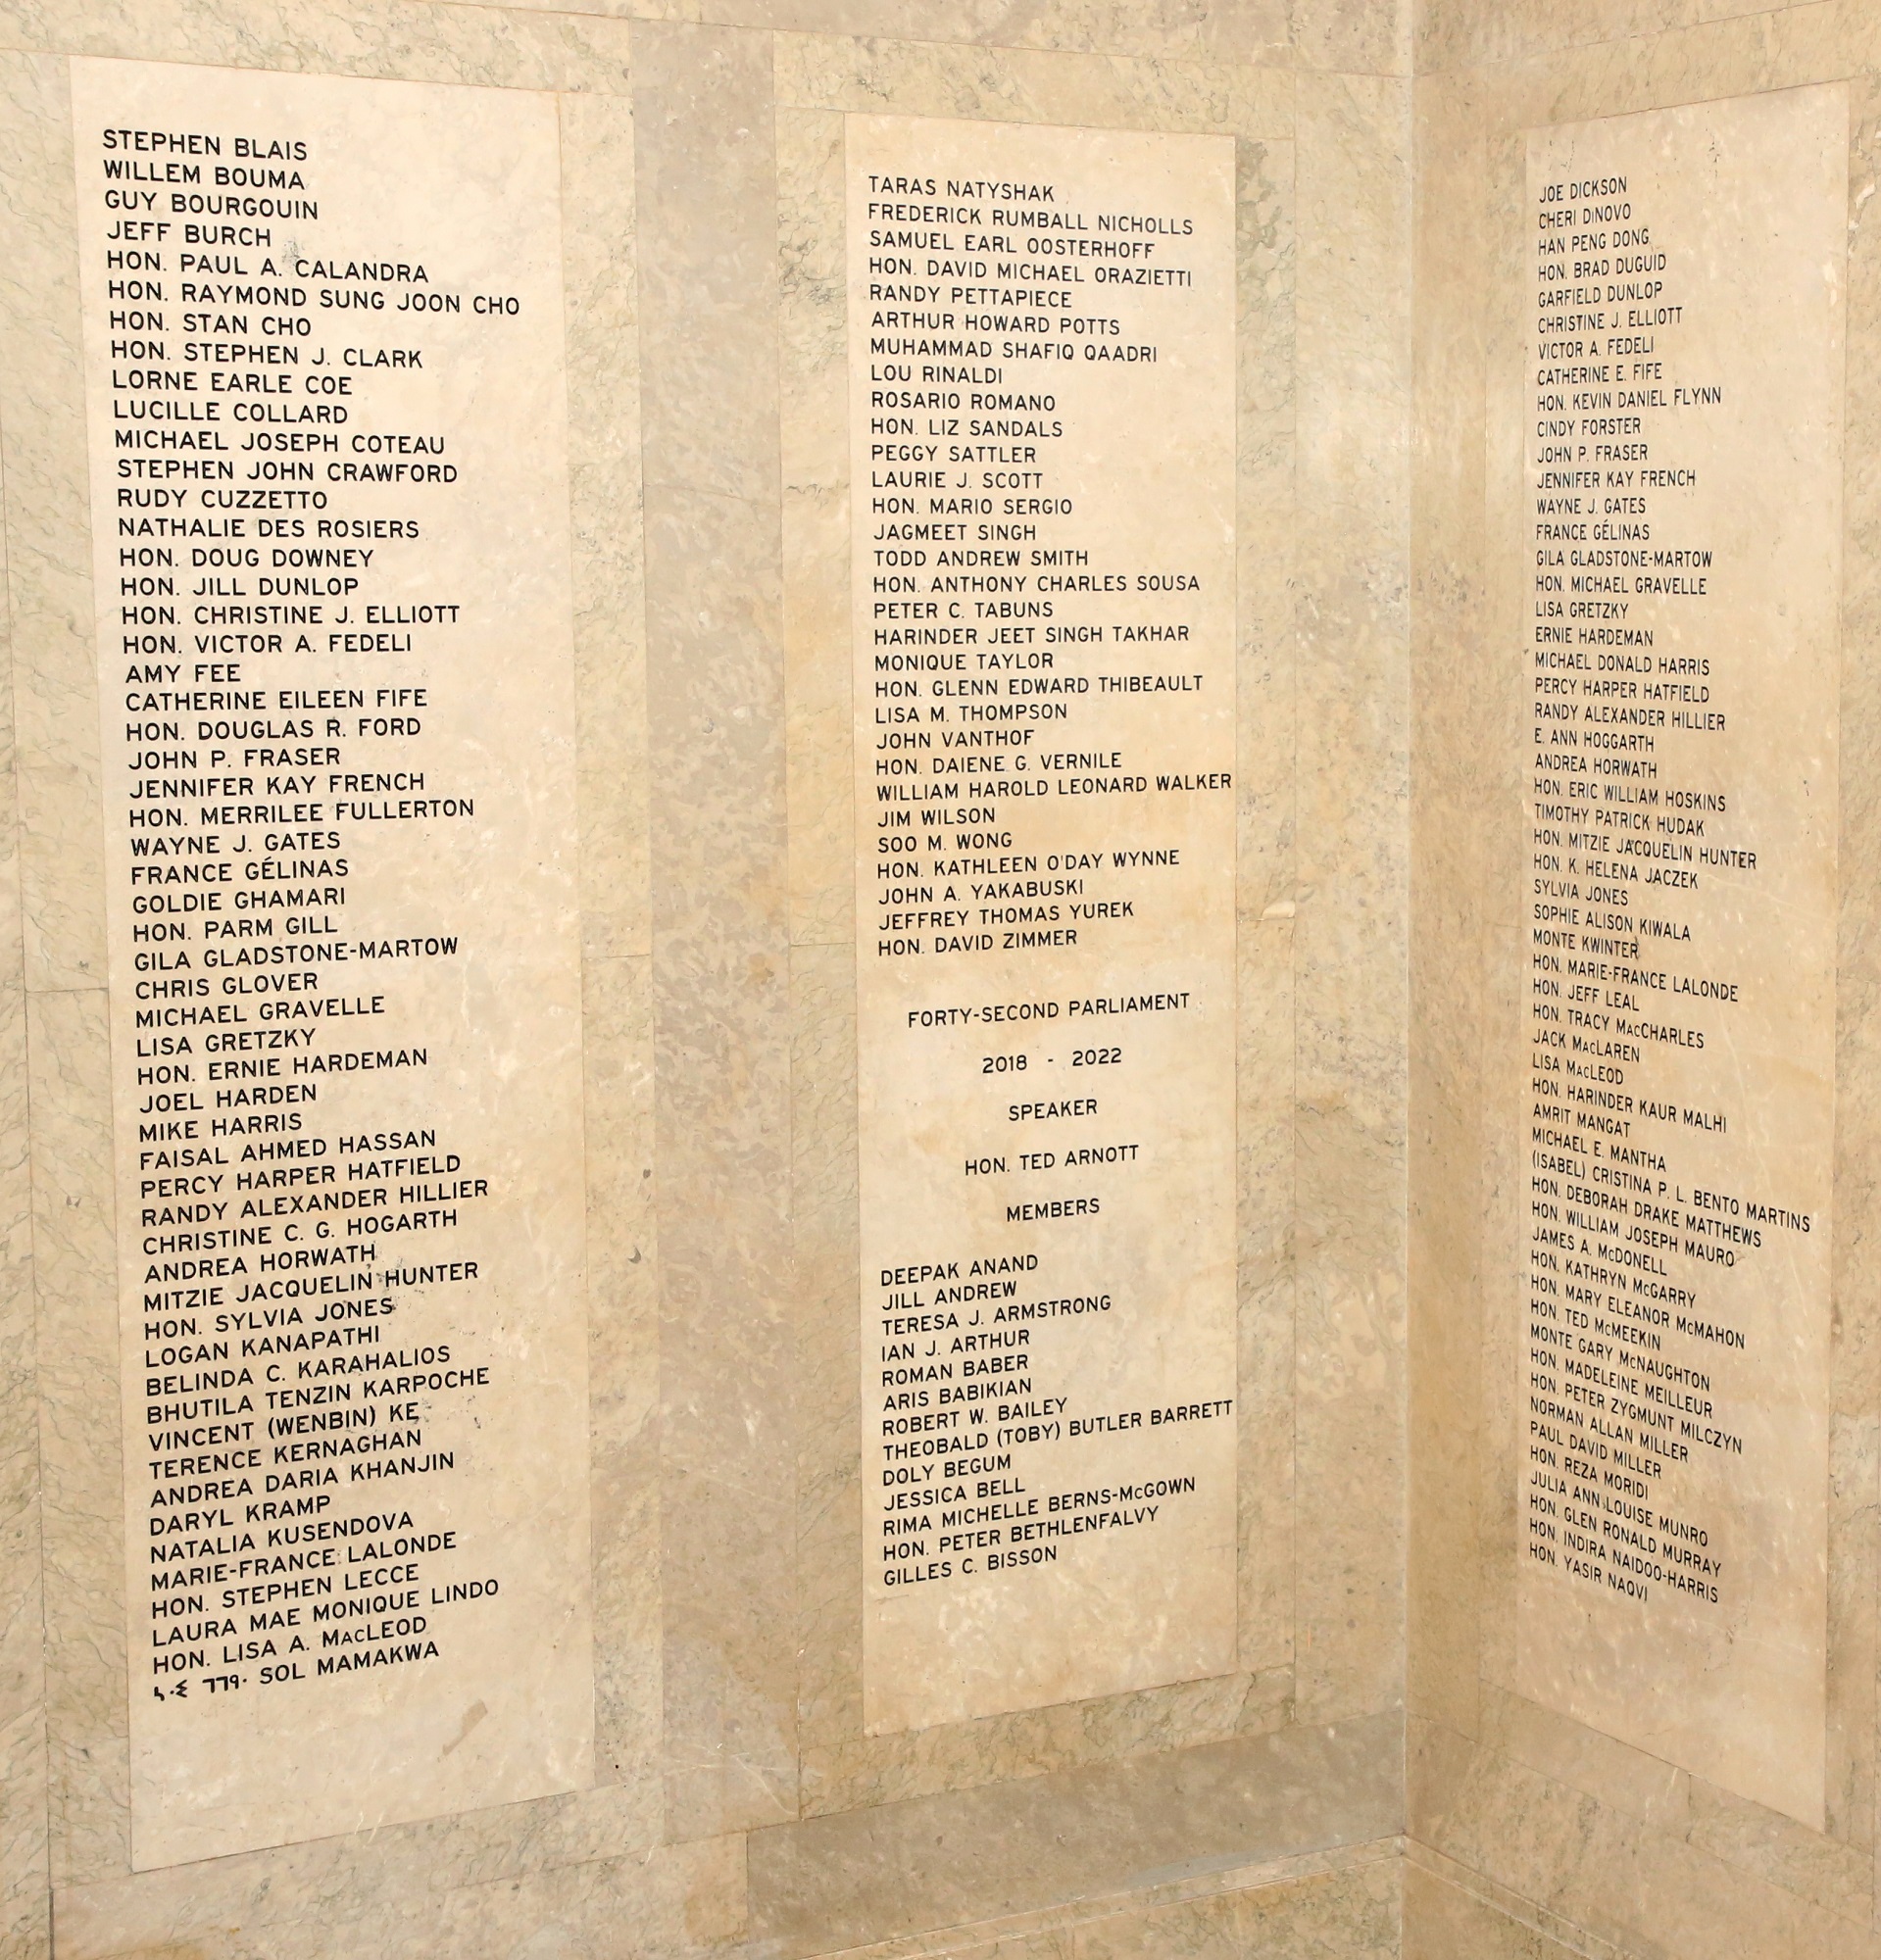 Picture showing marble walls with the names of Ontario Members of Provincial Parliament.